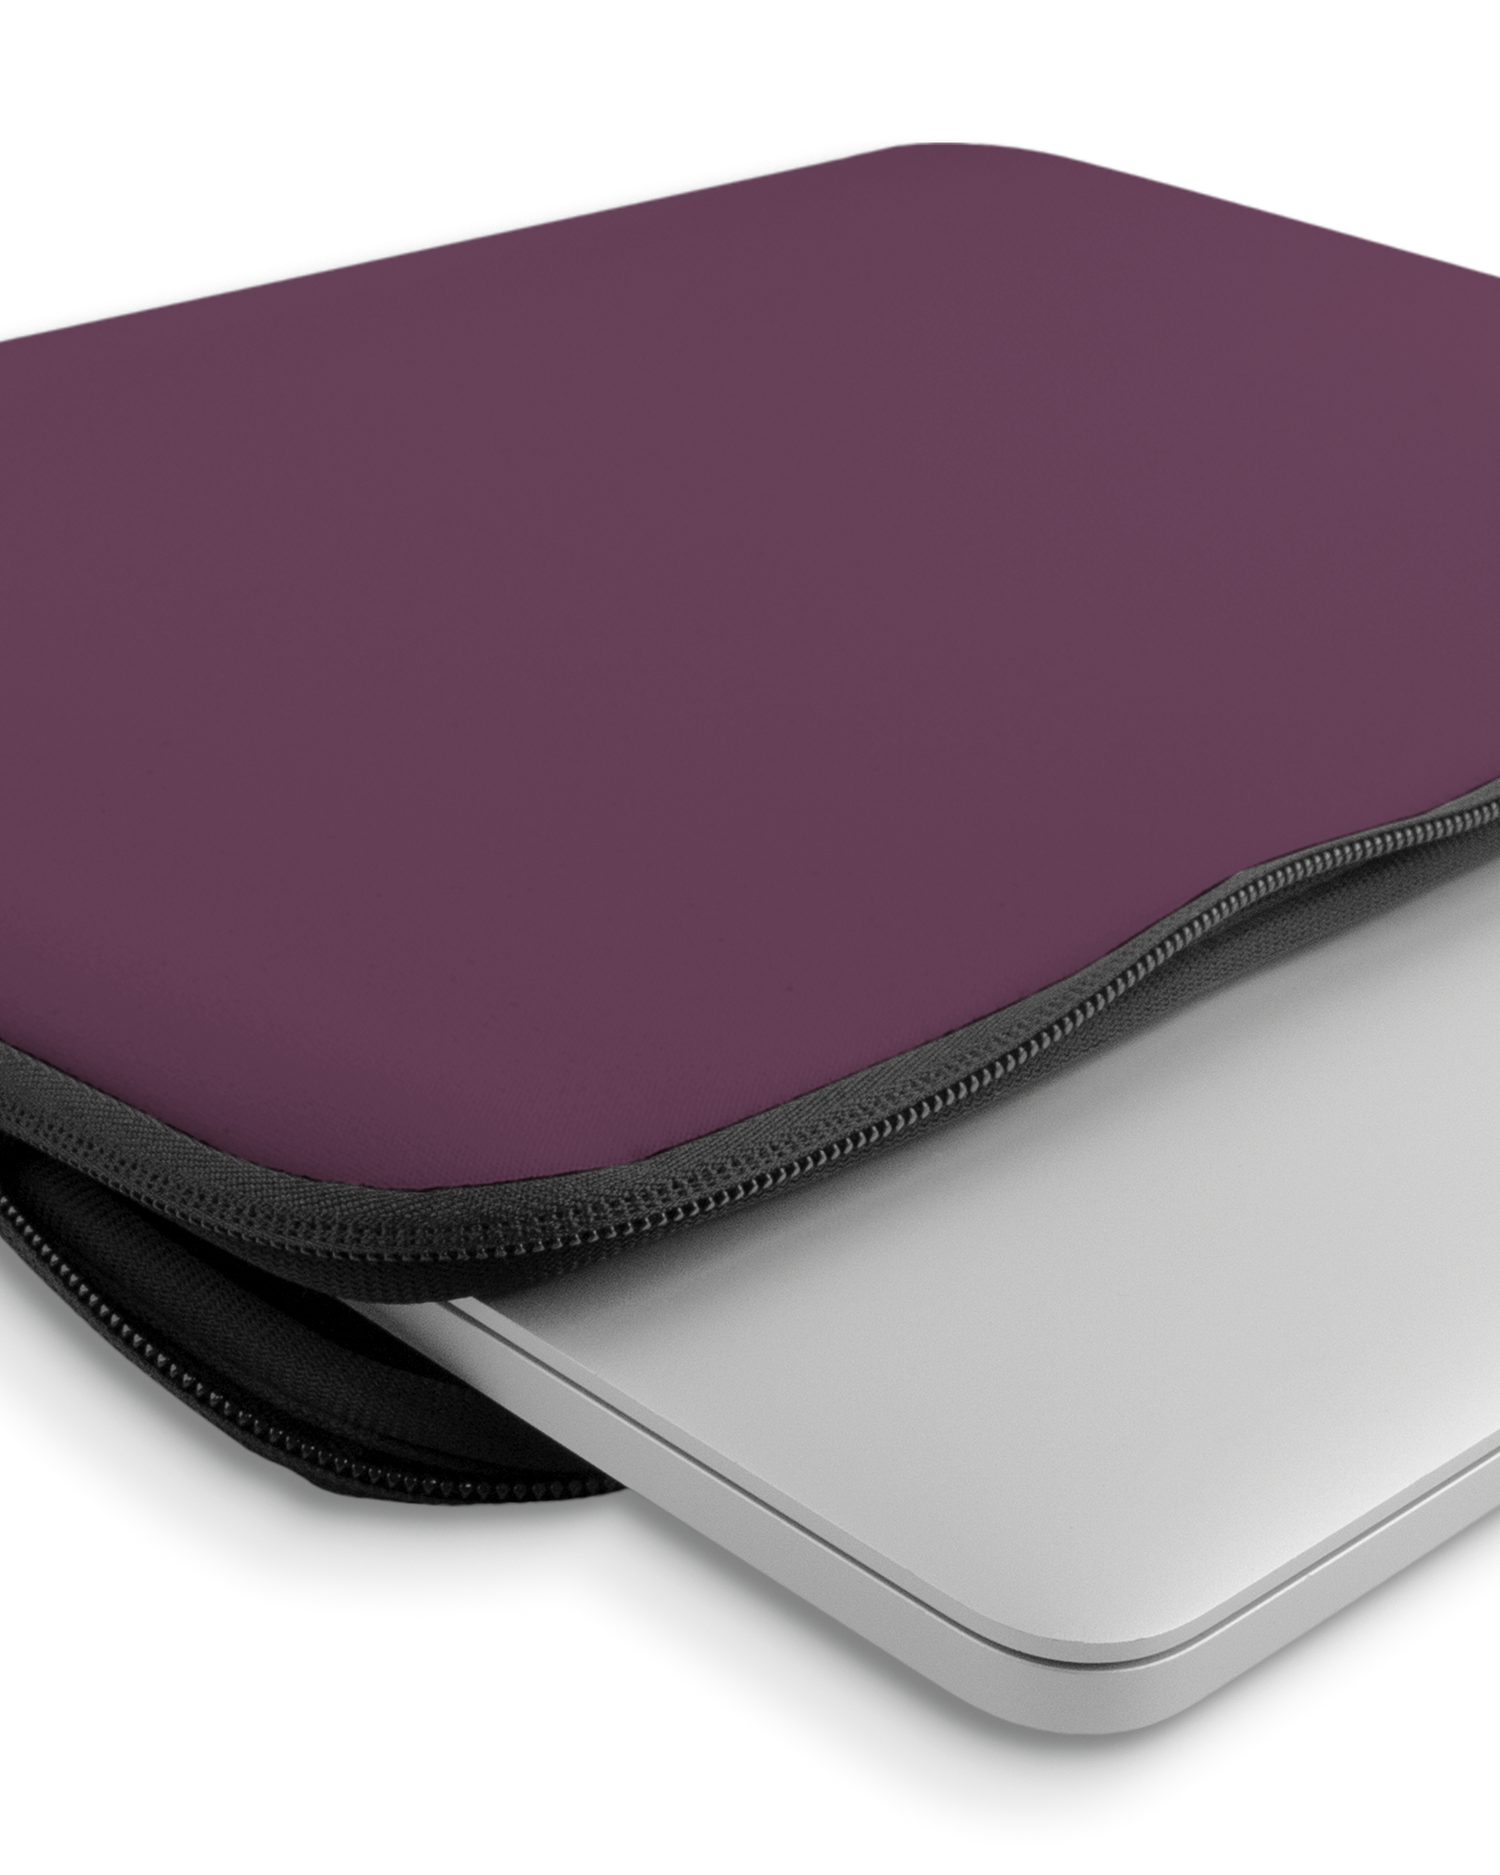 PLUM Laptop Case 14-15 inch with device inside